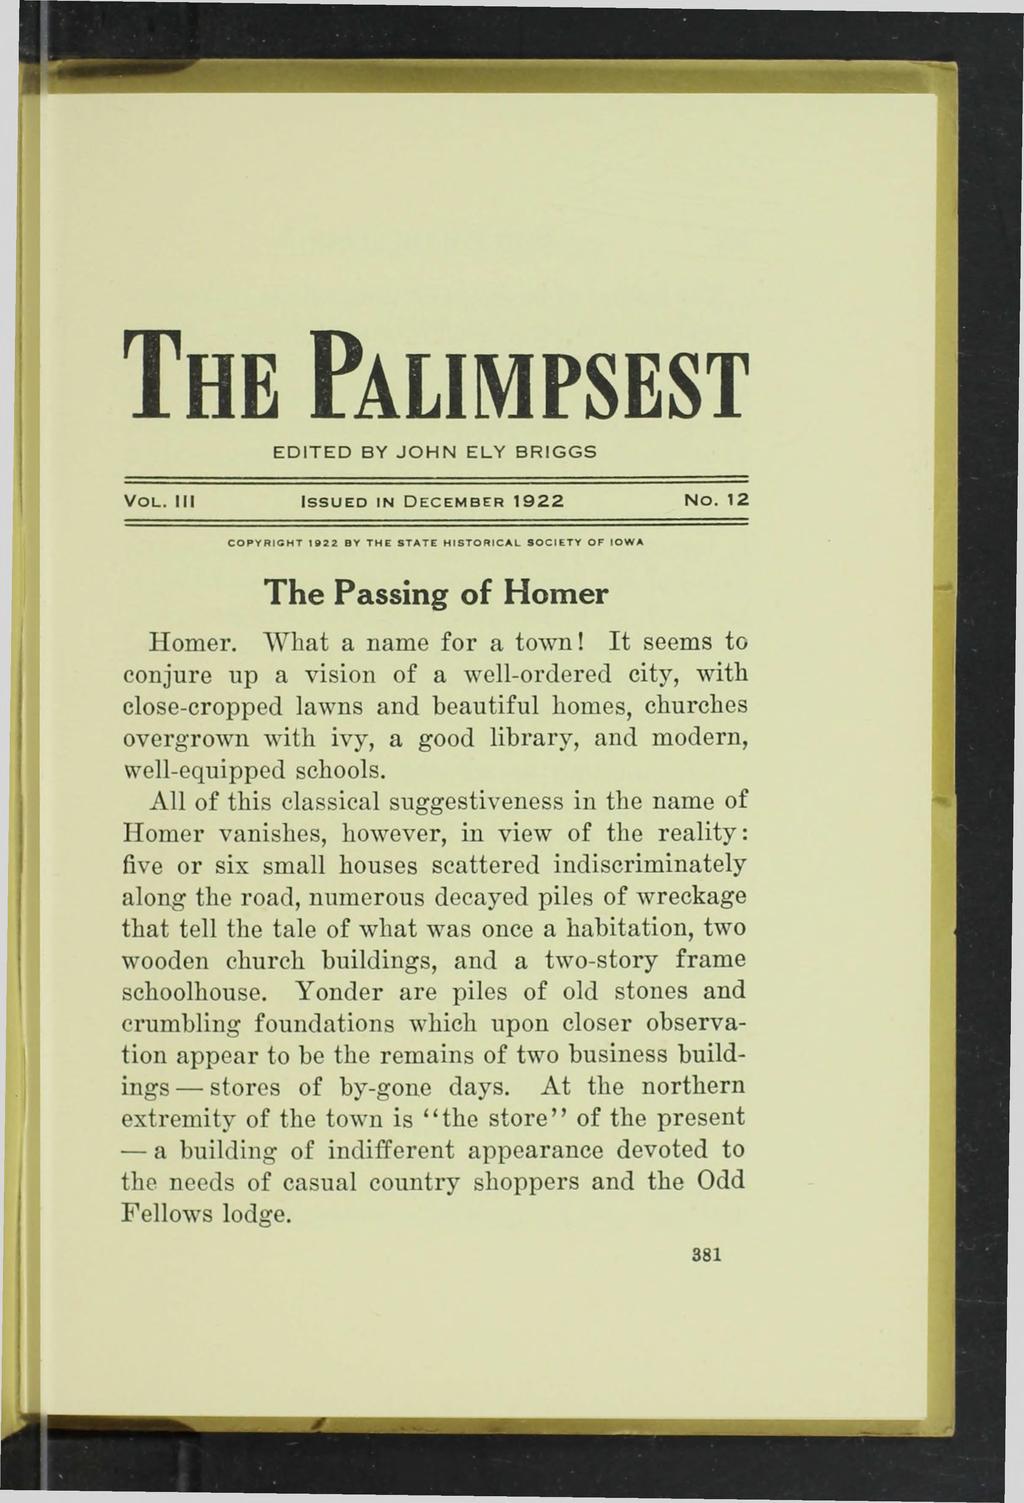 The Palimpsest EDITED BY JOHN ELY BRIGGS Vol. Ill Issued in December 1922 No. 12 COPYRIGHT 192 2 BY THE STATE HISTORICAL SOCIETY OF IOWA The Passing of Homer Homer. What a name for a town!